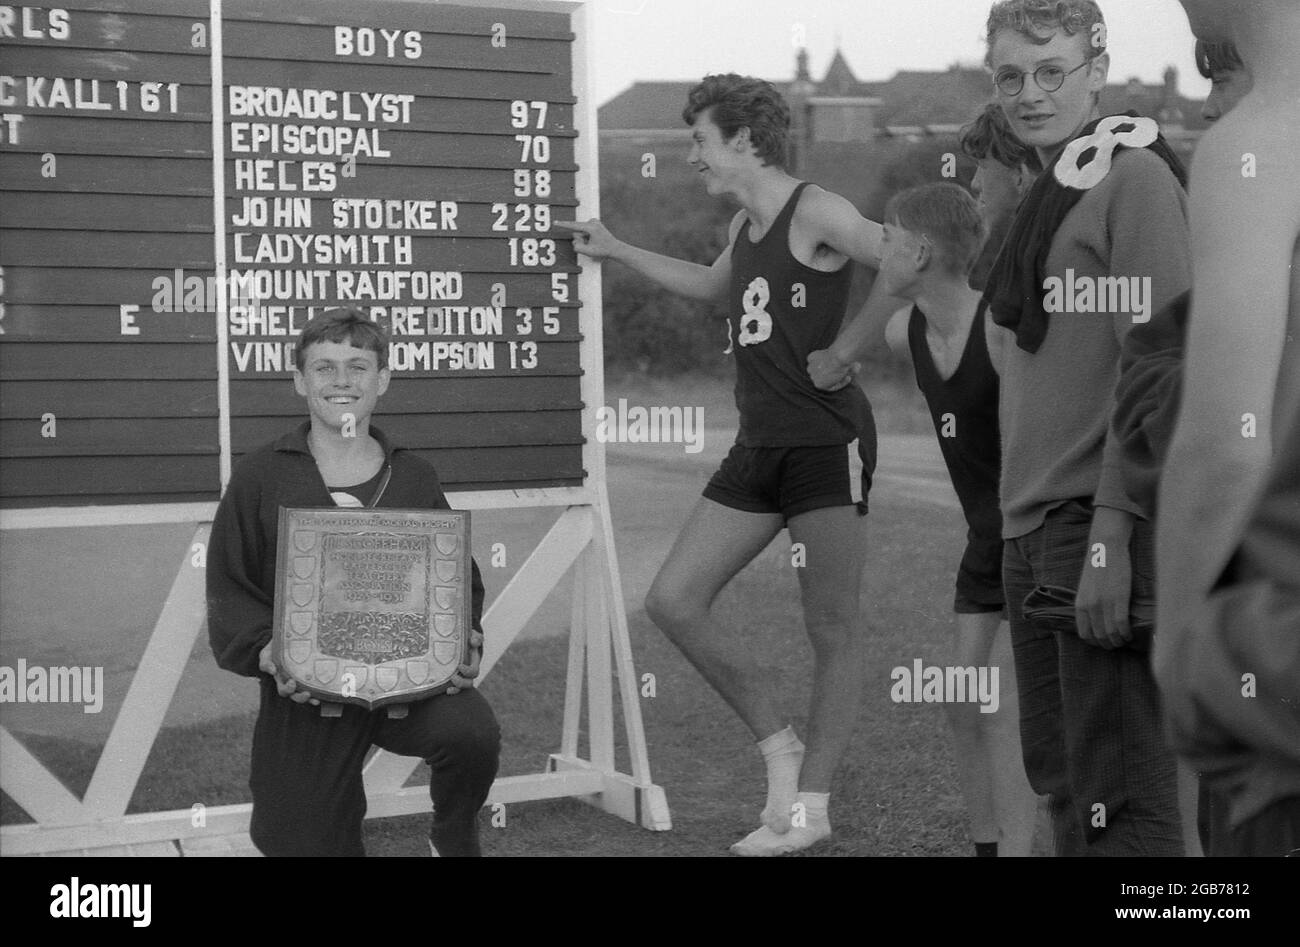 1964, in his cotton tracksuit, kneeling down in front of a scoreboard, a delighted teenage boy from the John Stocker School, holding a shield, the Scoffham Memorial Trophy, Exeter, England, UK.  J.B Scoffman was Hon Secretary of the Exeter Teachers Association from 1923 to1931. Also in the picture, a young man in his running kit shows the points total for the John Stocker school on the scoreboard. Originally known as the Dunsford Road School, In 1921 it took the name of a local man, John Stocker. Stock Photo